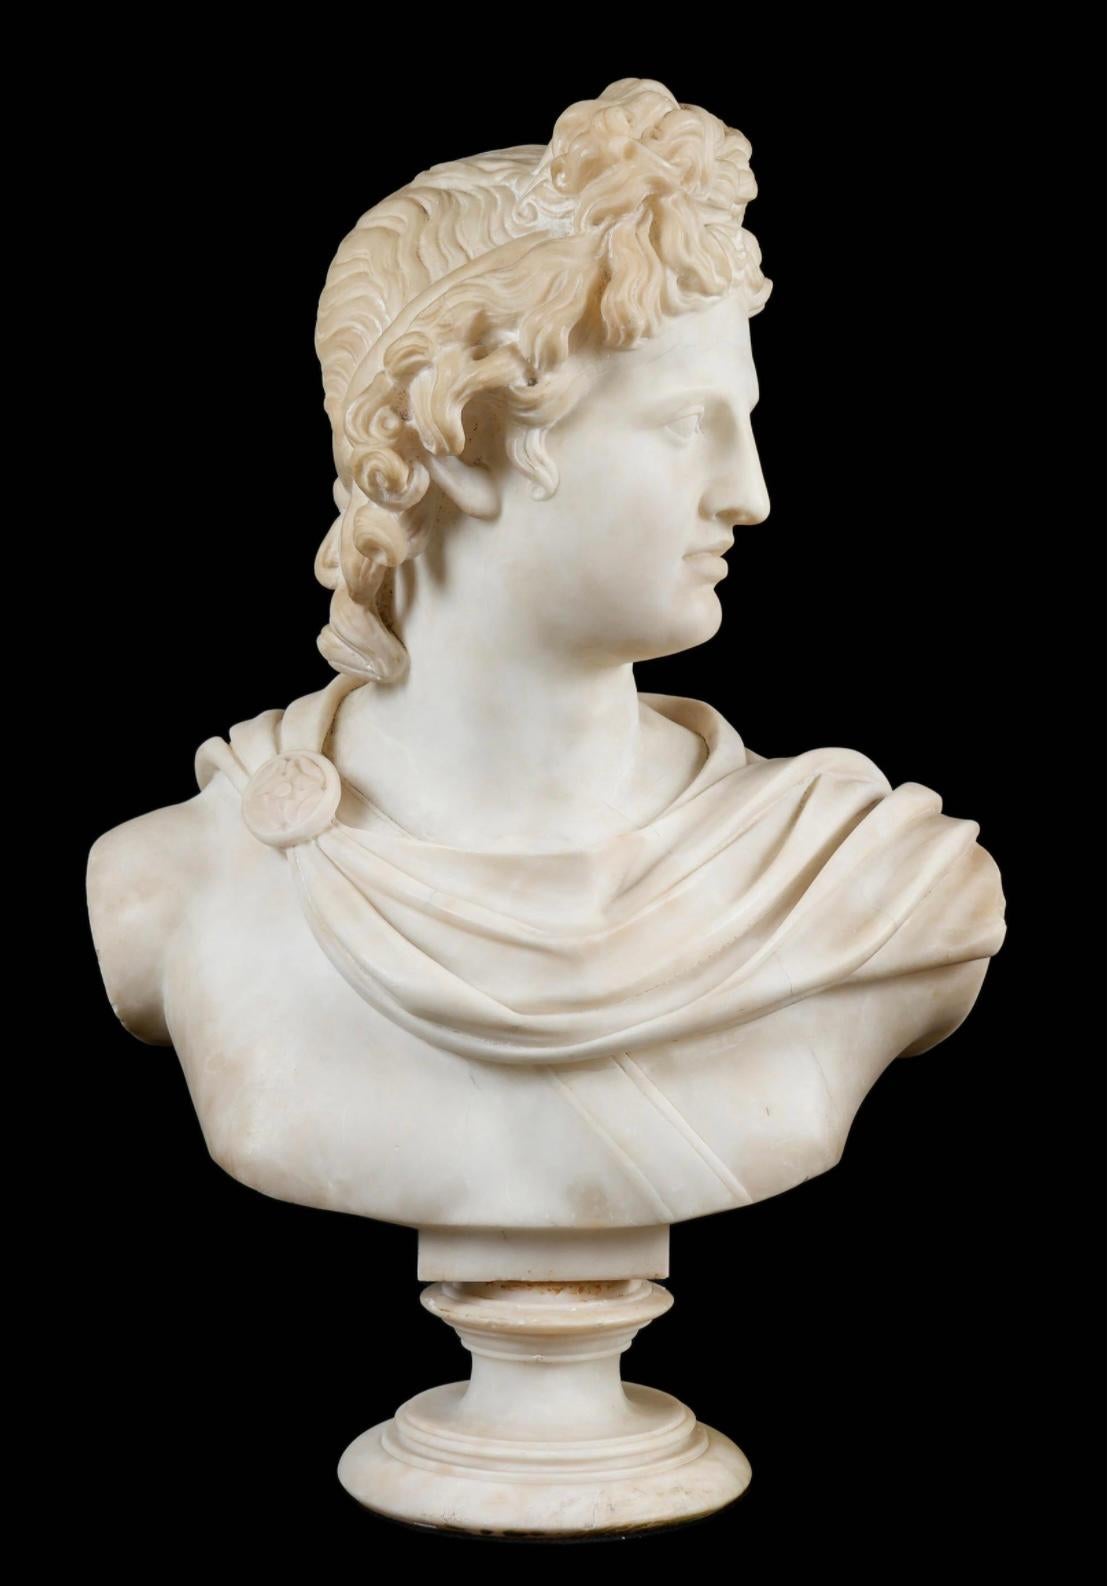 This impressive 19th century carrara marble bust is inspired by the famous marble sculpture found in the Vatican Museum. Apollo has been variously recognized as a God of music, poetry, art, medicine, sun, light and knowledge.
Here He is depicted in